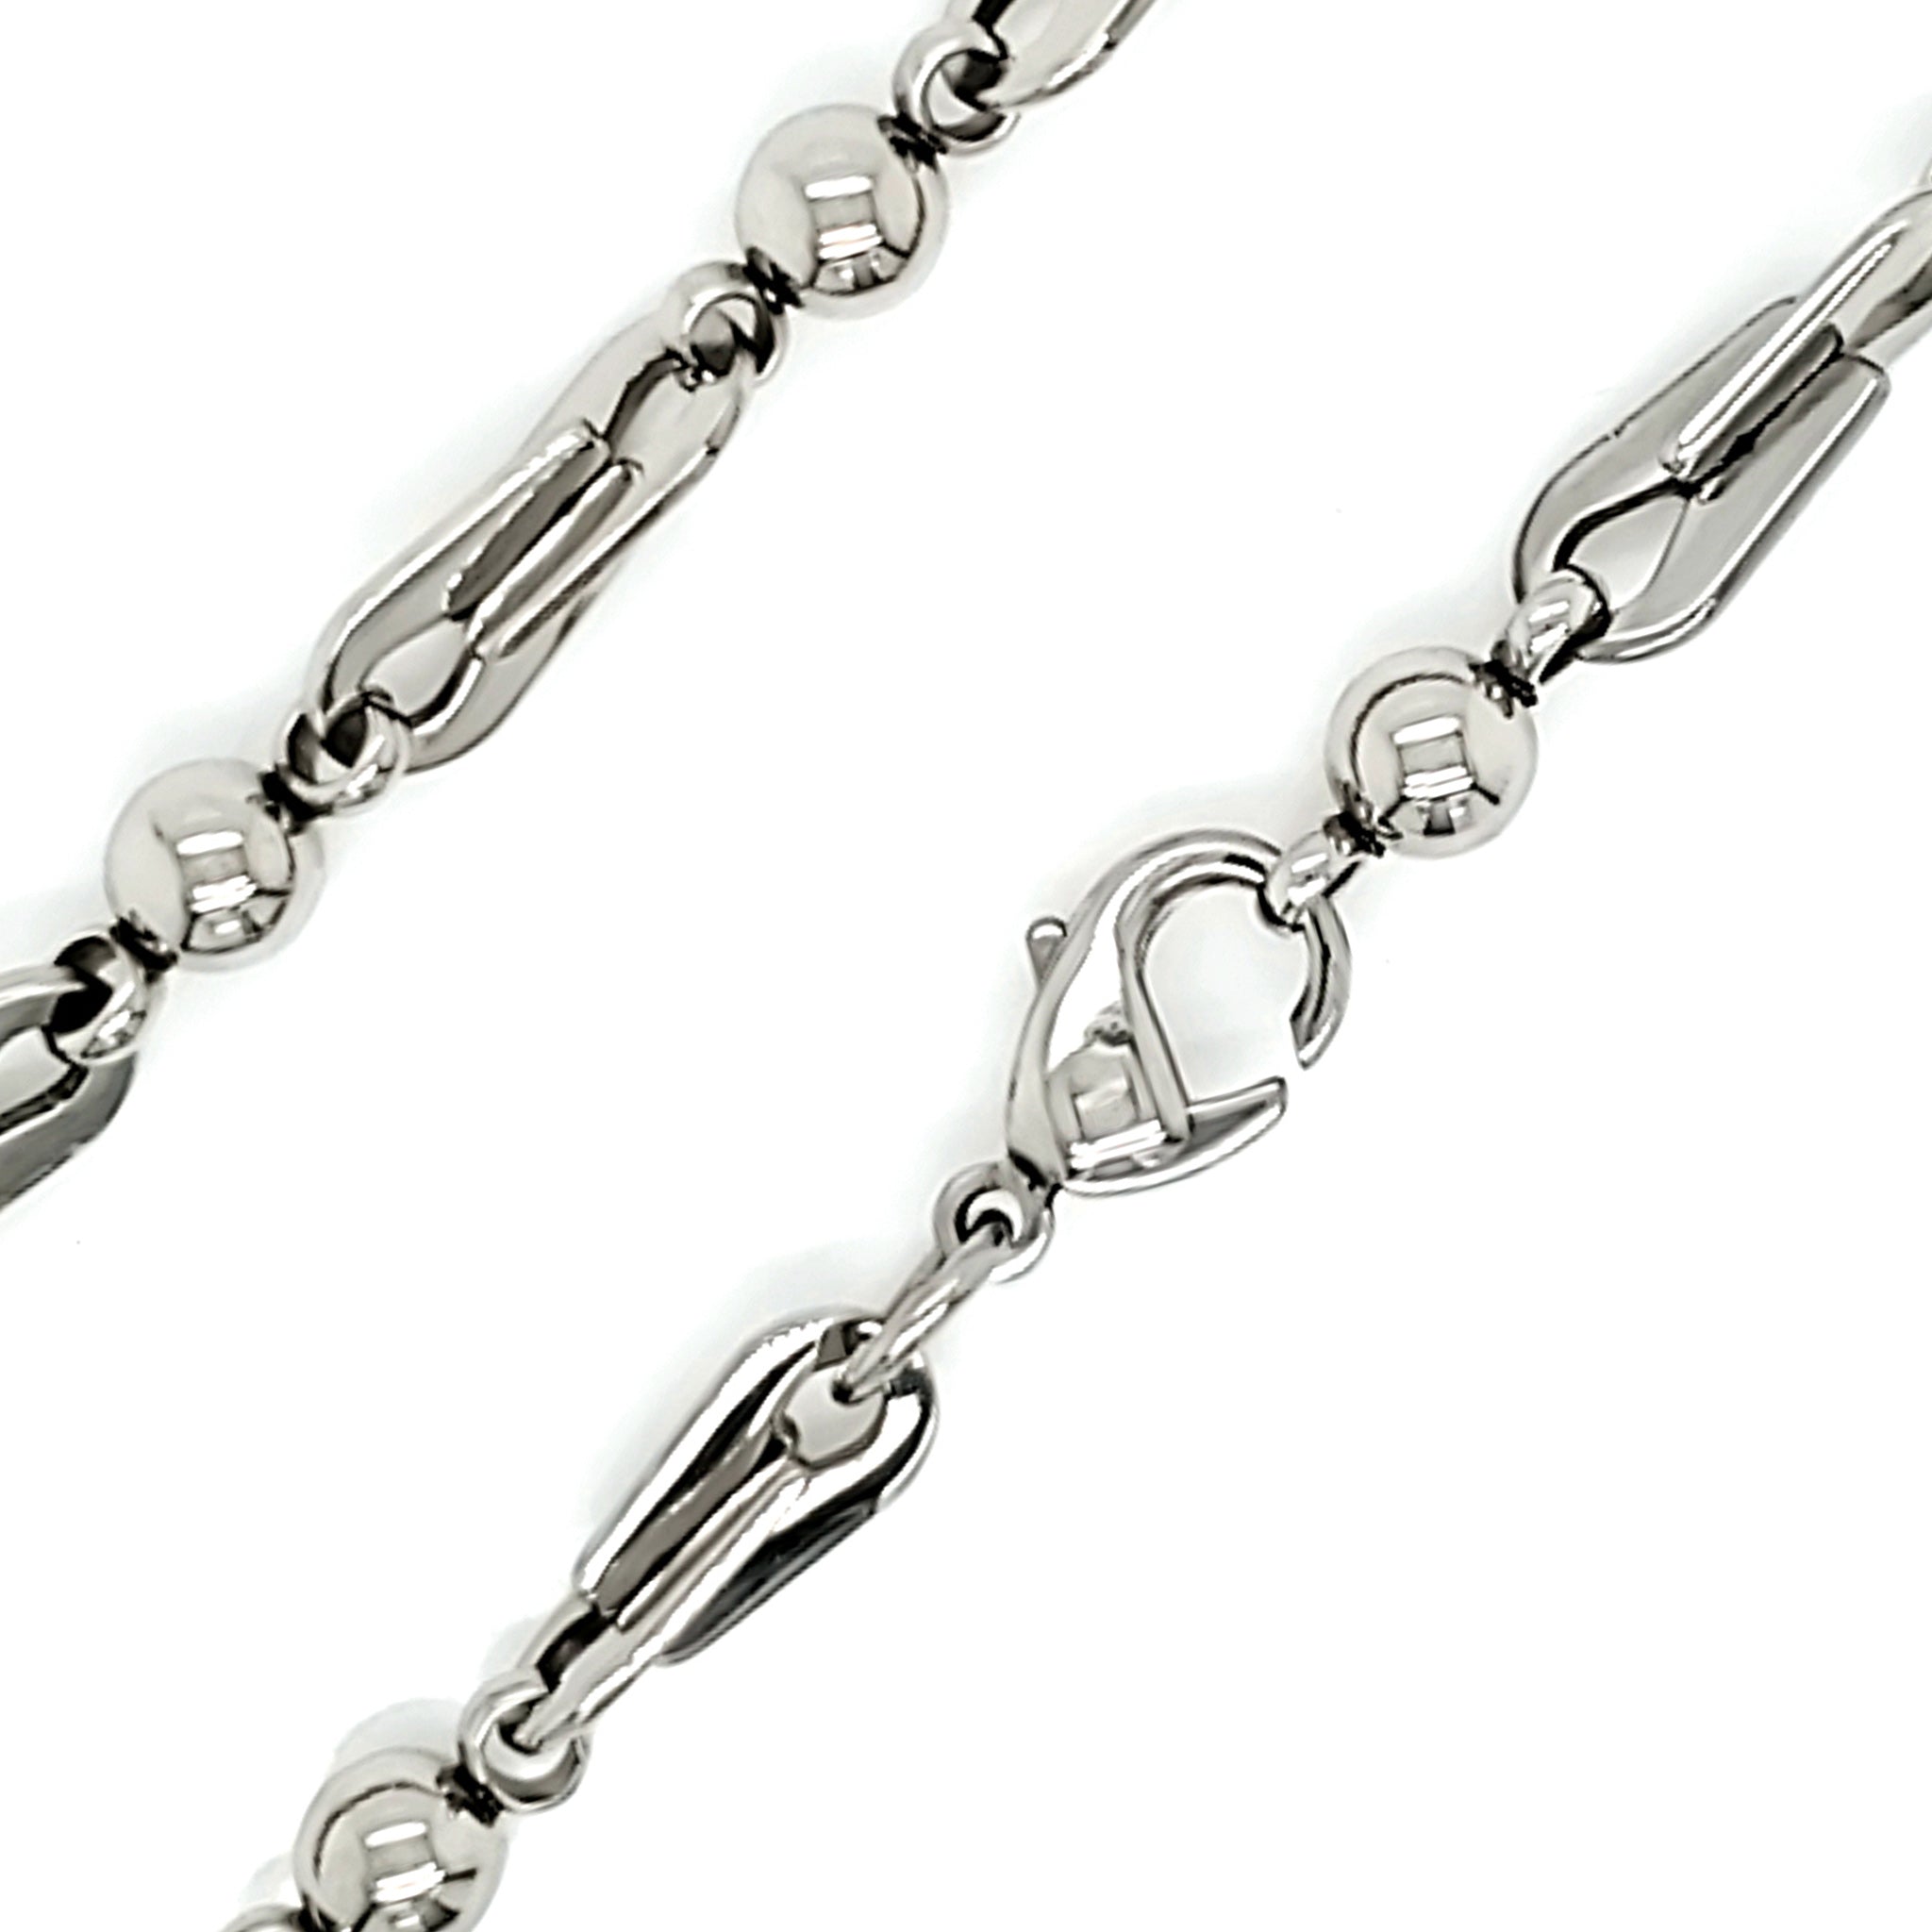 Stainless Steel Chain Necklace / NKD0361-stainless steel jewelry- how to clean stainless steel jewelry- stainless steel jewelry wholesale- mens stainless steel jewelry- 316l stainless steel jewelry